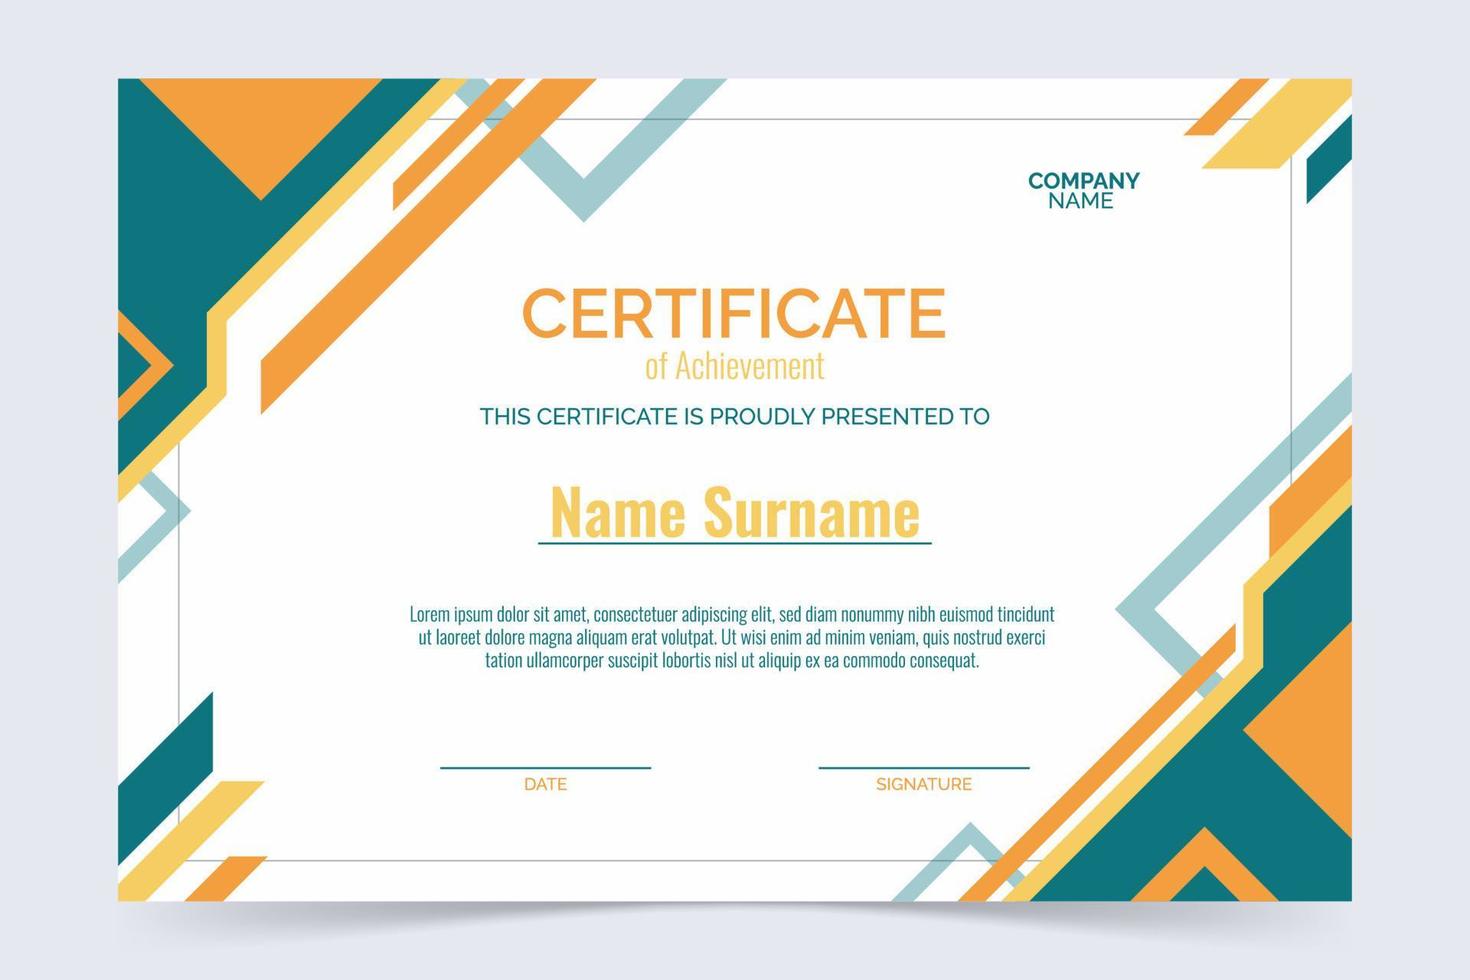 Certificate Template in Green and Orange Colors vector